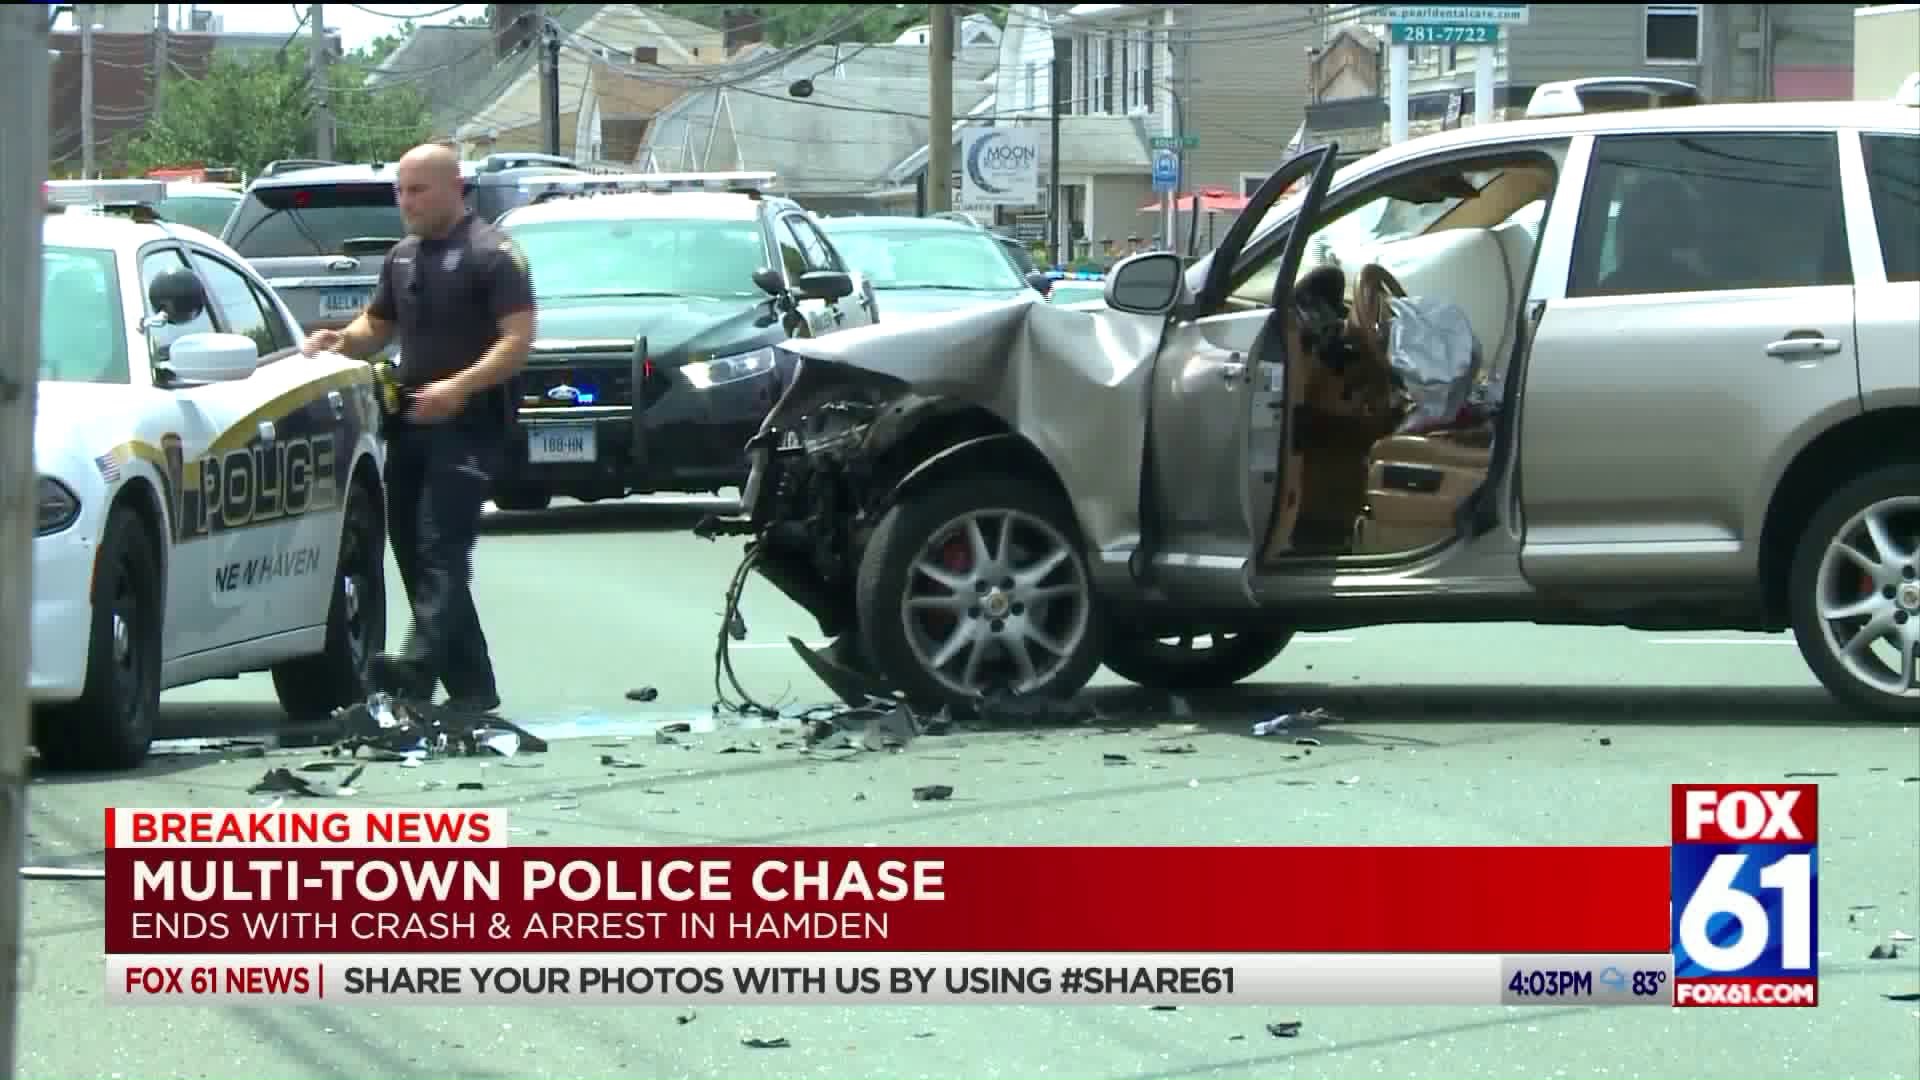 Muli-town police chase